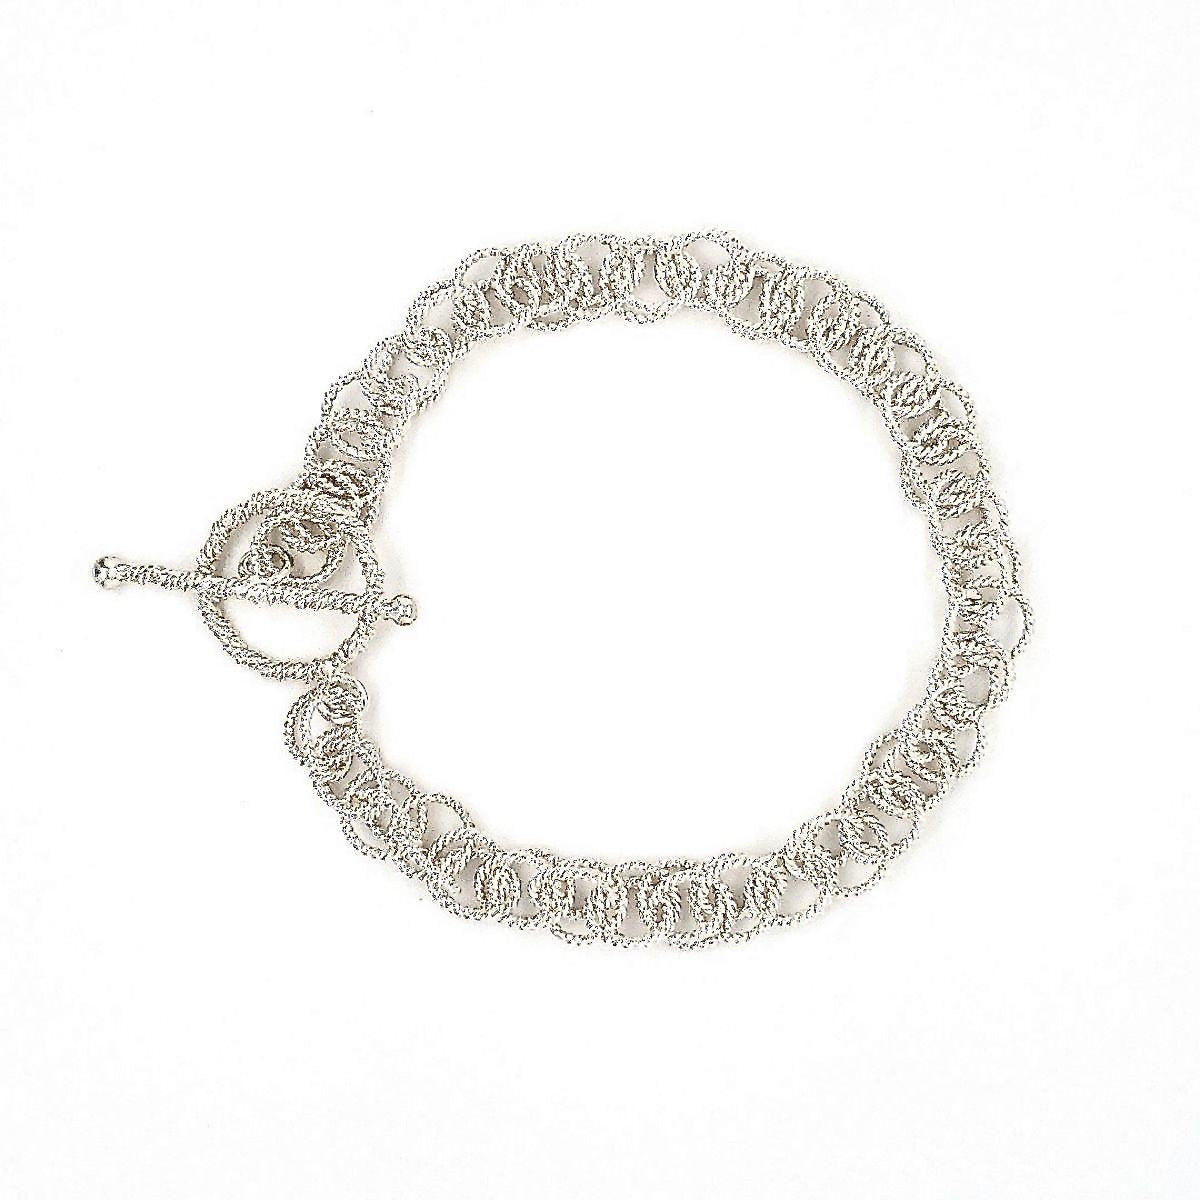 7.25 Handcrafted 925 Sterling Silver 7mm Spinner Link Bracelet with Toggle Clasp